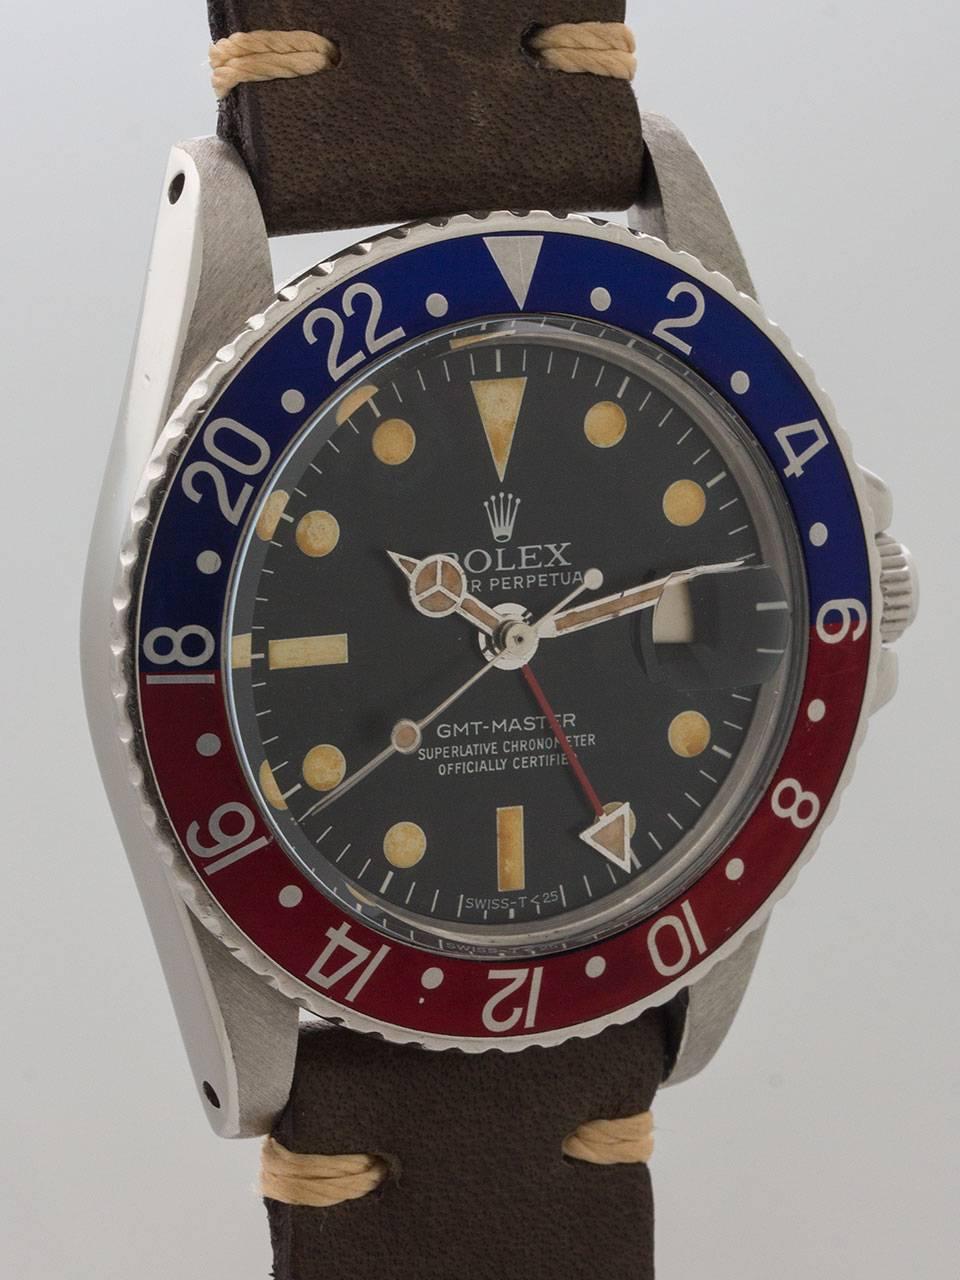 Rolex Stainless Steel GMT-Master ref 1675 serial no. 1.8 million circa 1967. Very pleasing vintage model with red and blue pepsi bezel and acrylic crystal. Nicely patina’d original matte black dial with patina’d luminous indexes and hands. Note some